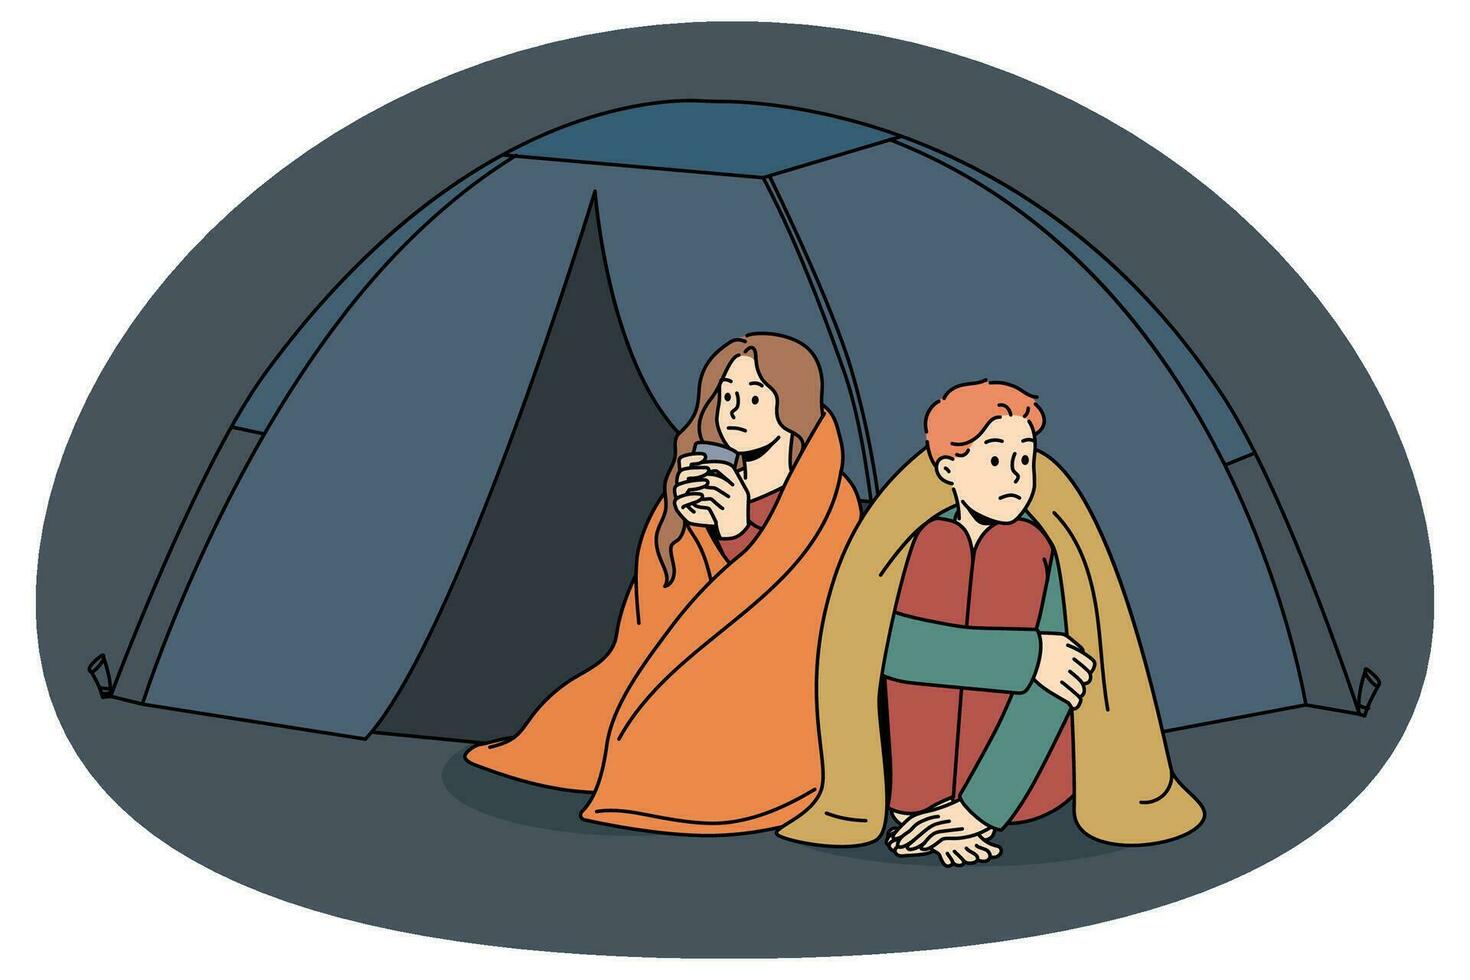 Man and woman living in tent on street vector